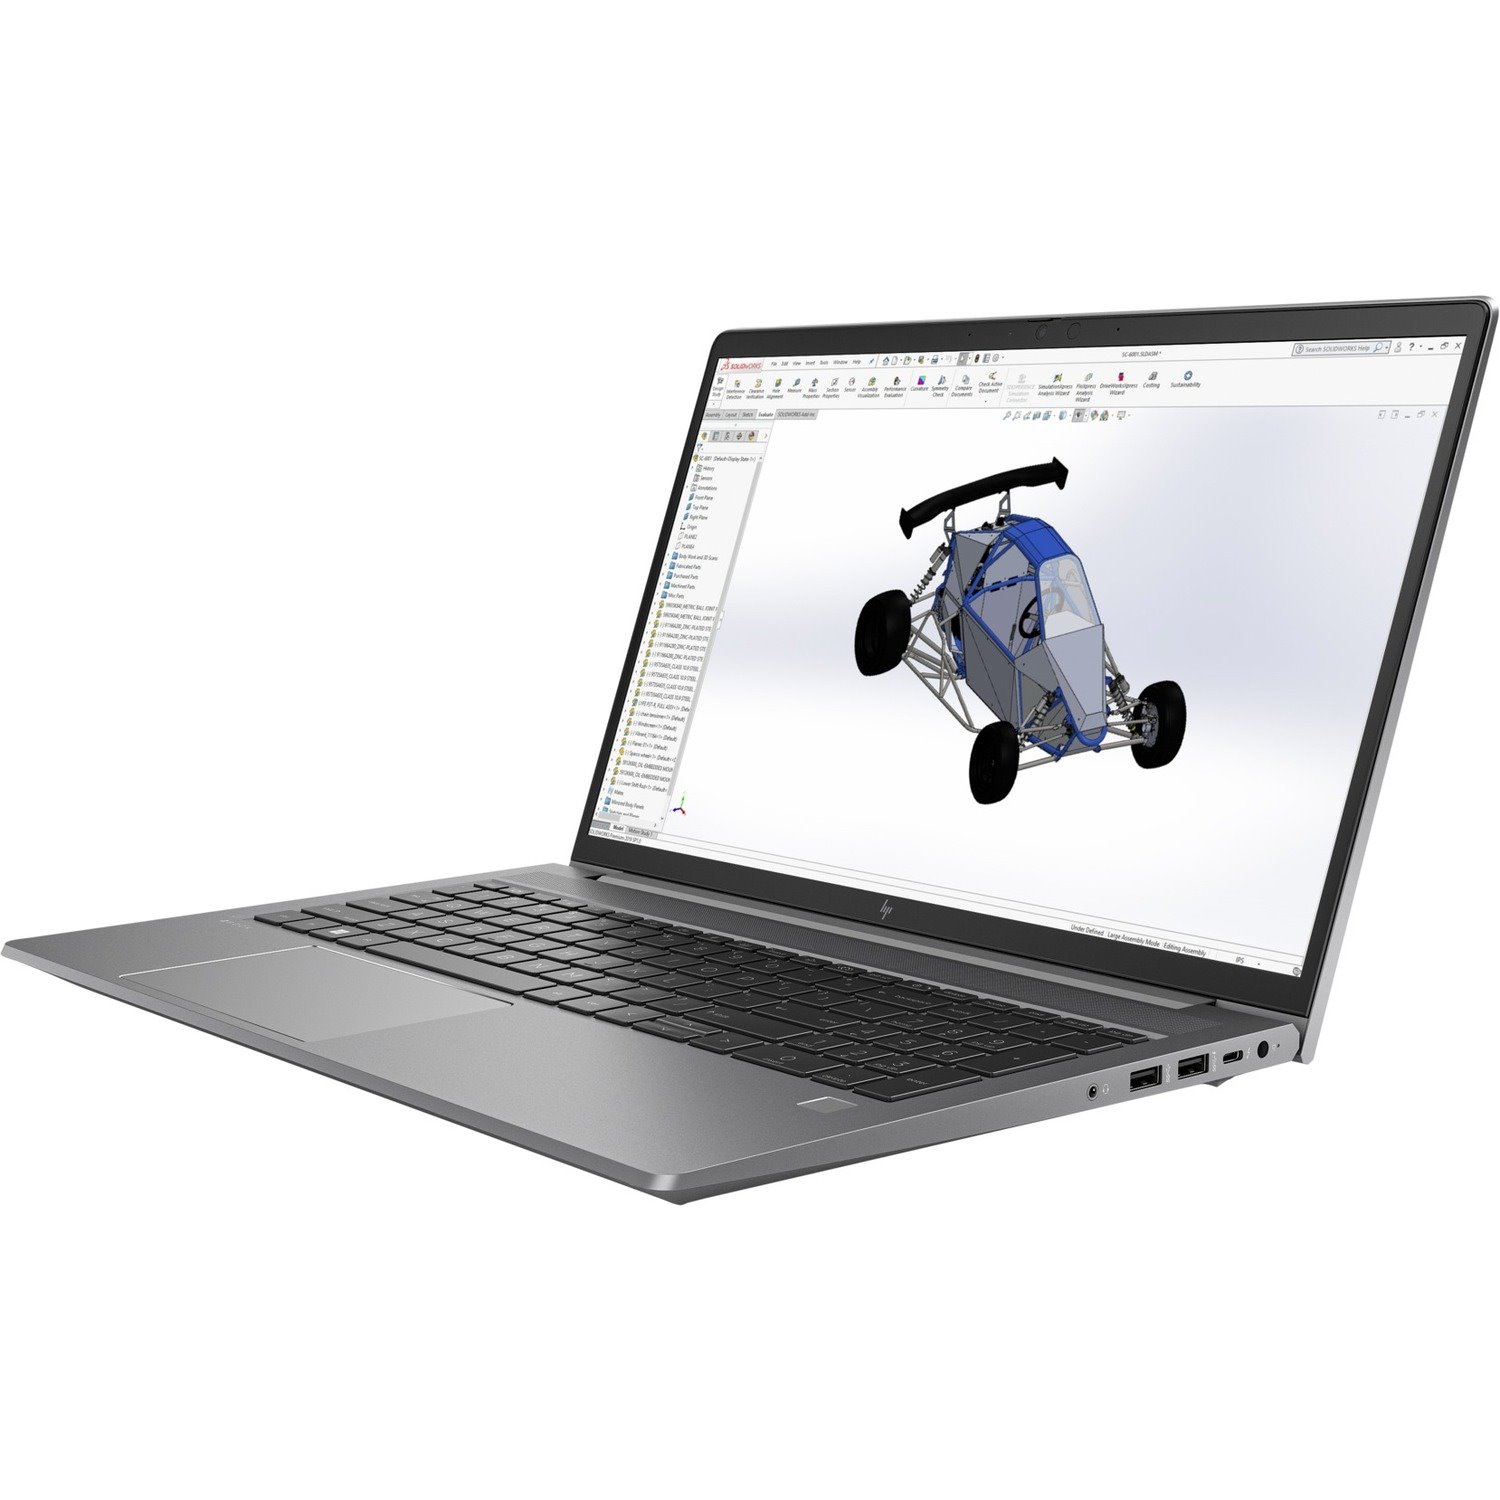 HP ZBook Power G9 15.6" Mobile Workstation - Full HD - 1920 x 1080 - Intel Core i7 12th Gen i7-12800H Tetradeca-core (14 Core) 2.40 GHz - 32 GB Total RAM - 1 TB SSD